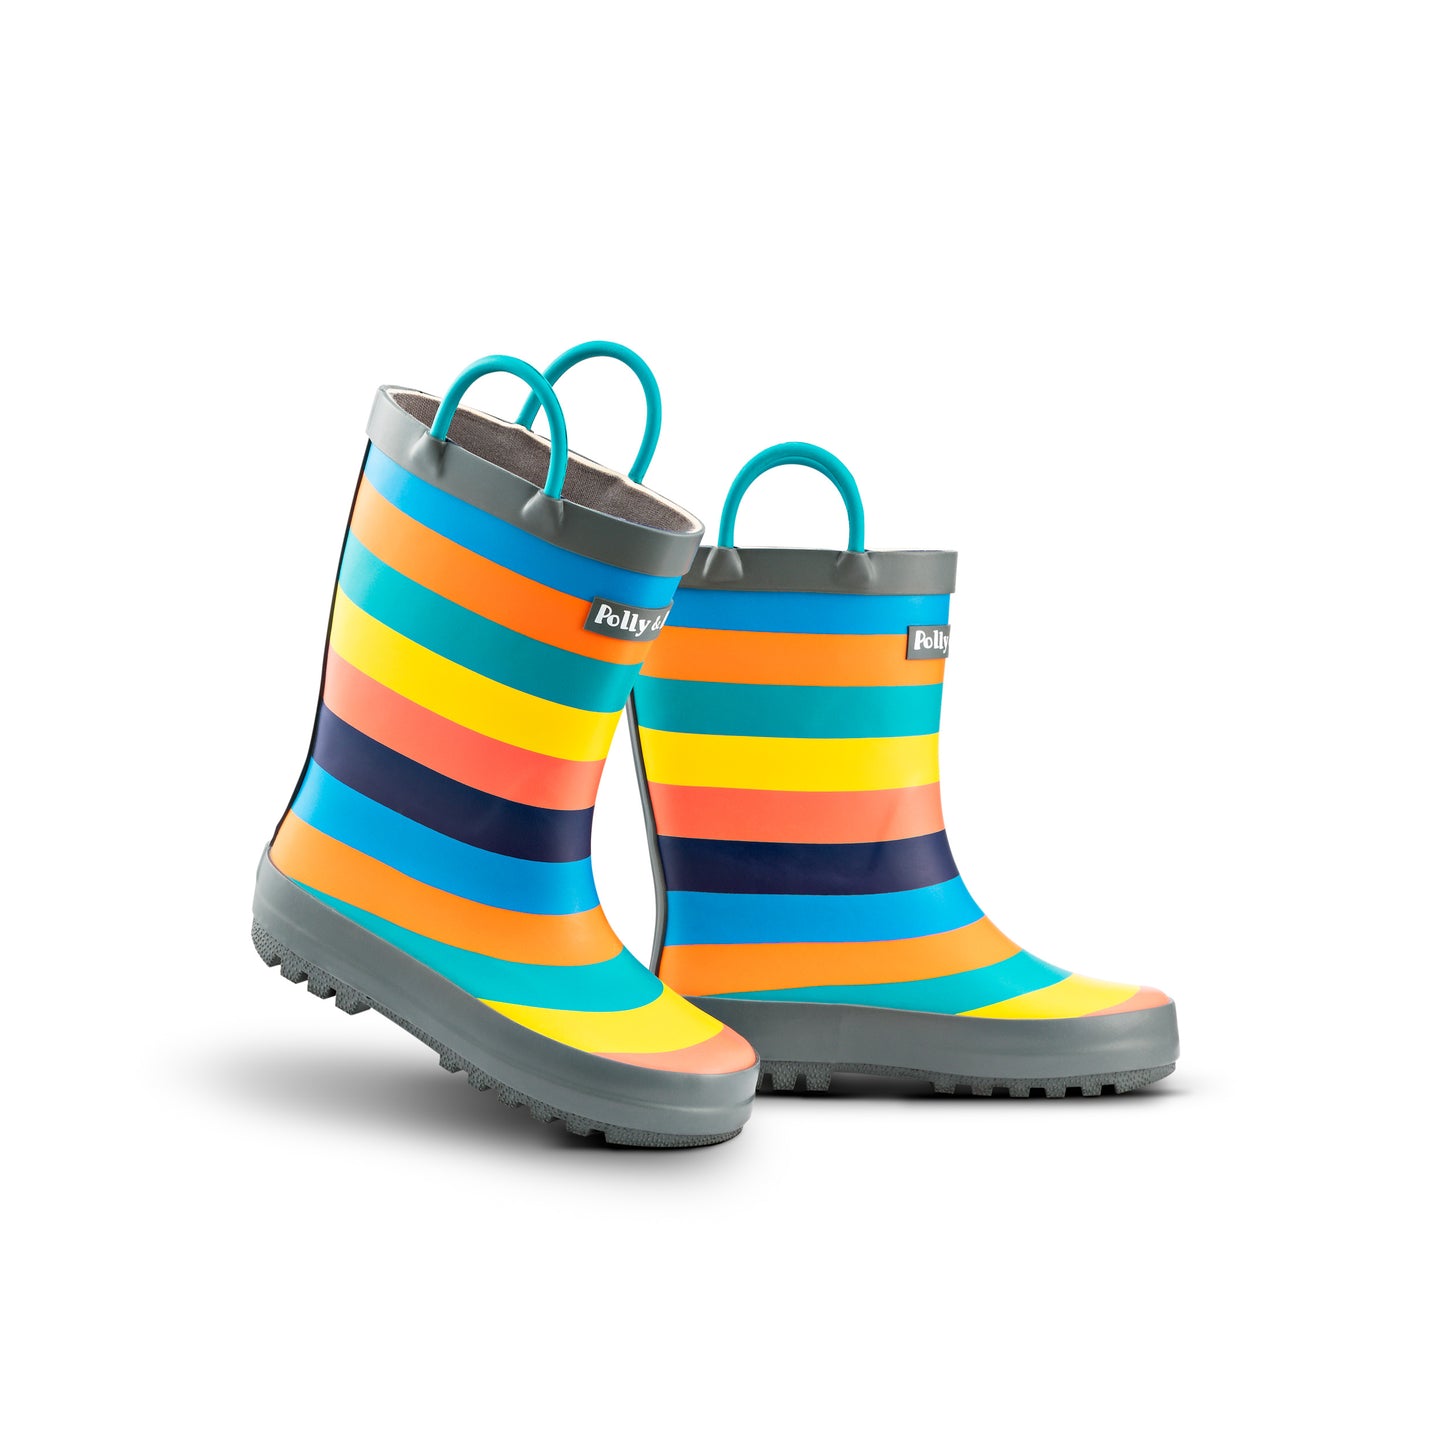 APRIL LAUNCH OFFER! Order your Sustainable Rainboots which Includes FREE shipping AND a free pair of rainbow knee high bamboo socks